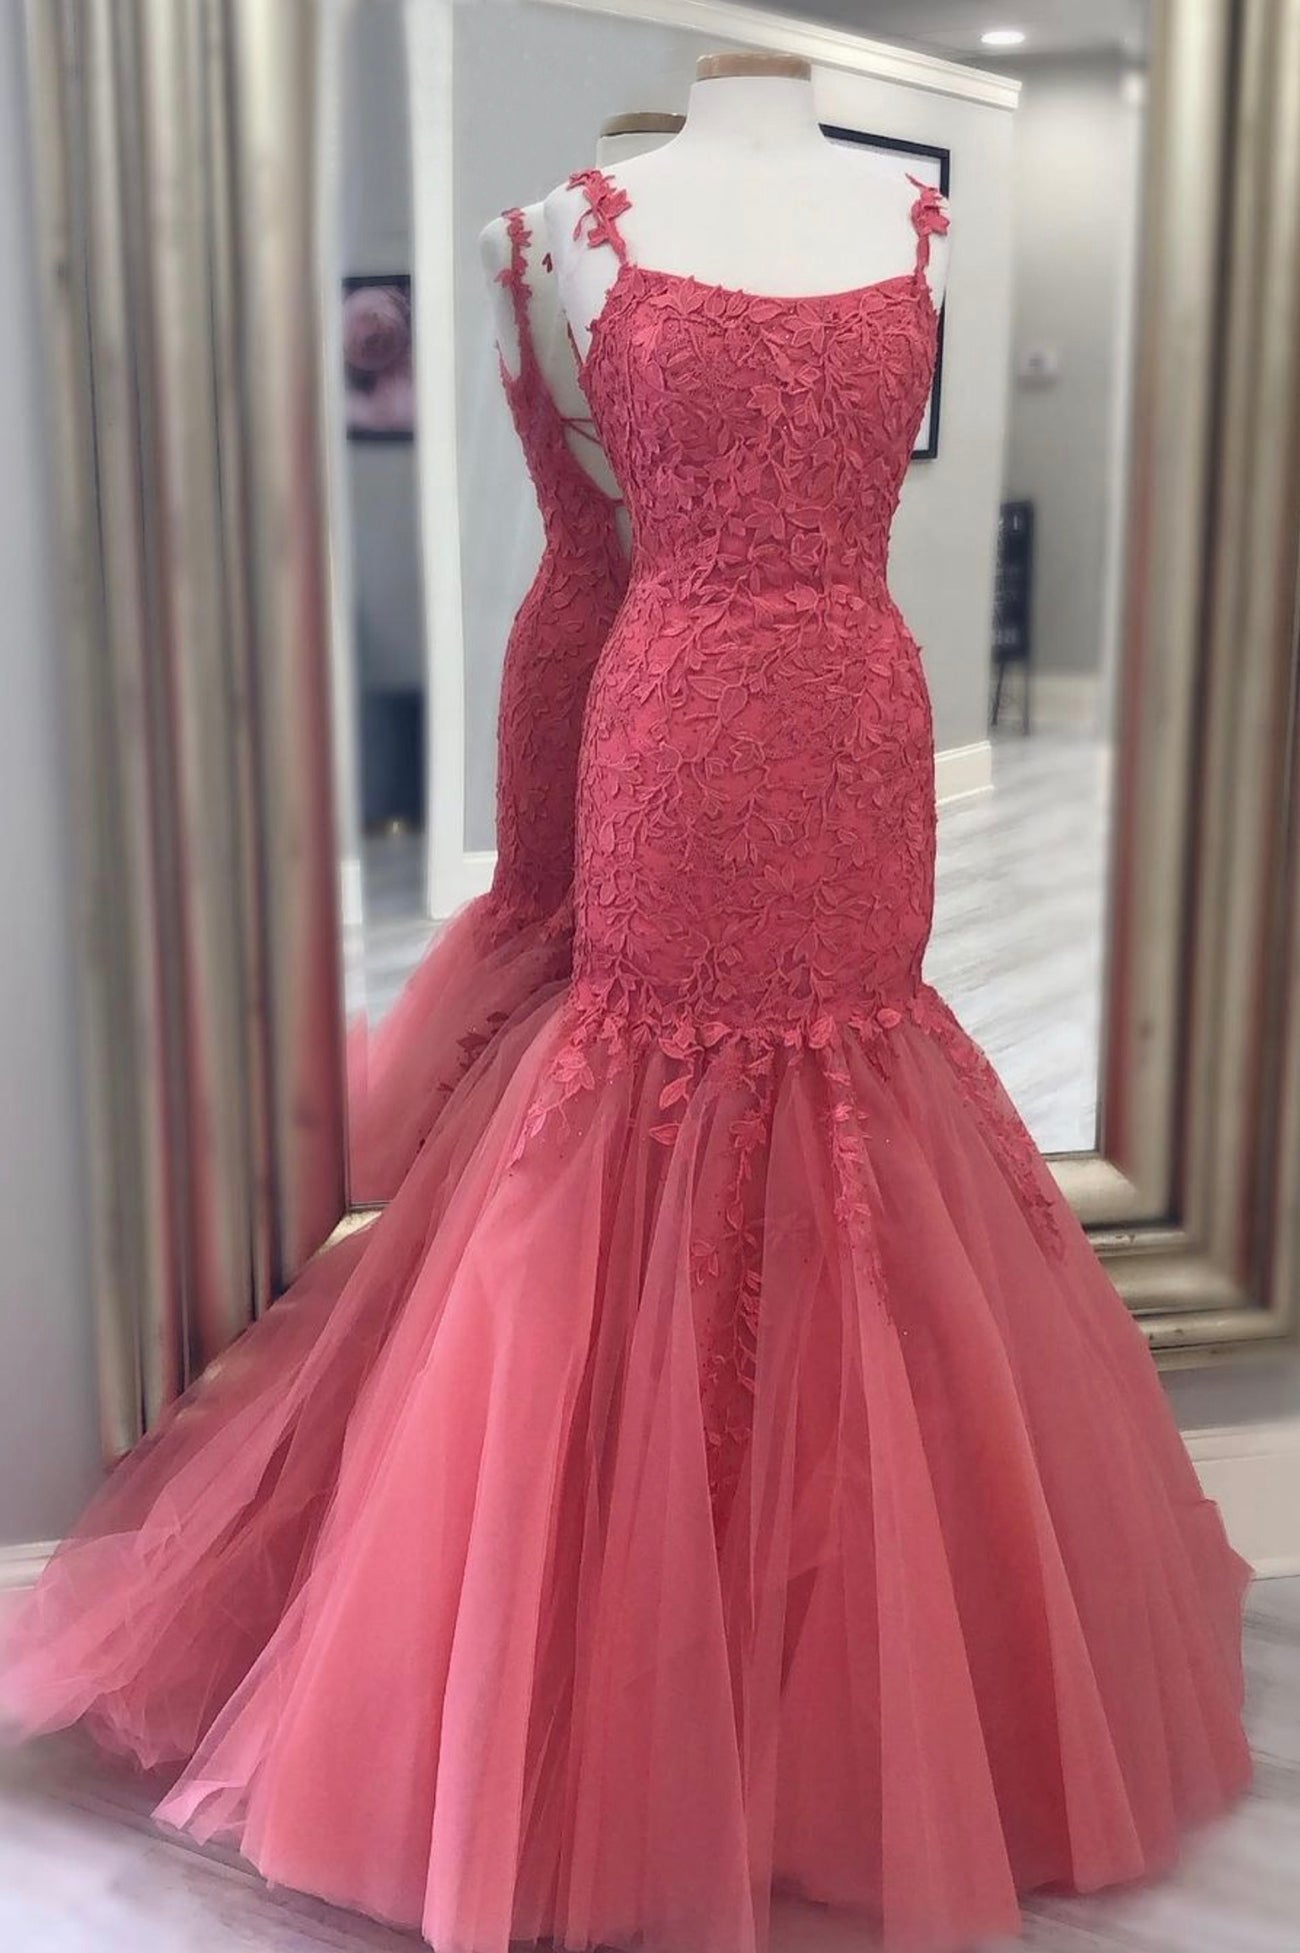 Prom Dresses Off The Shoulder, Mermaid Lace Long Prom Dresses, Lace Backless Evening Party Dresses